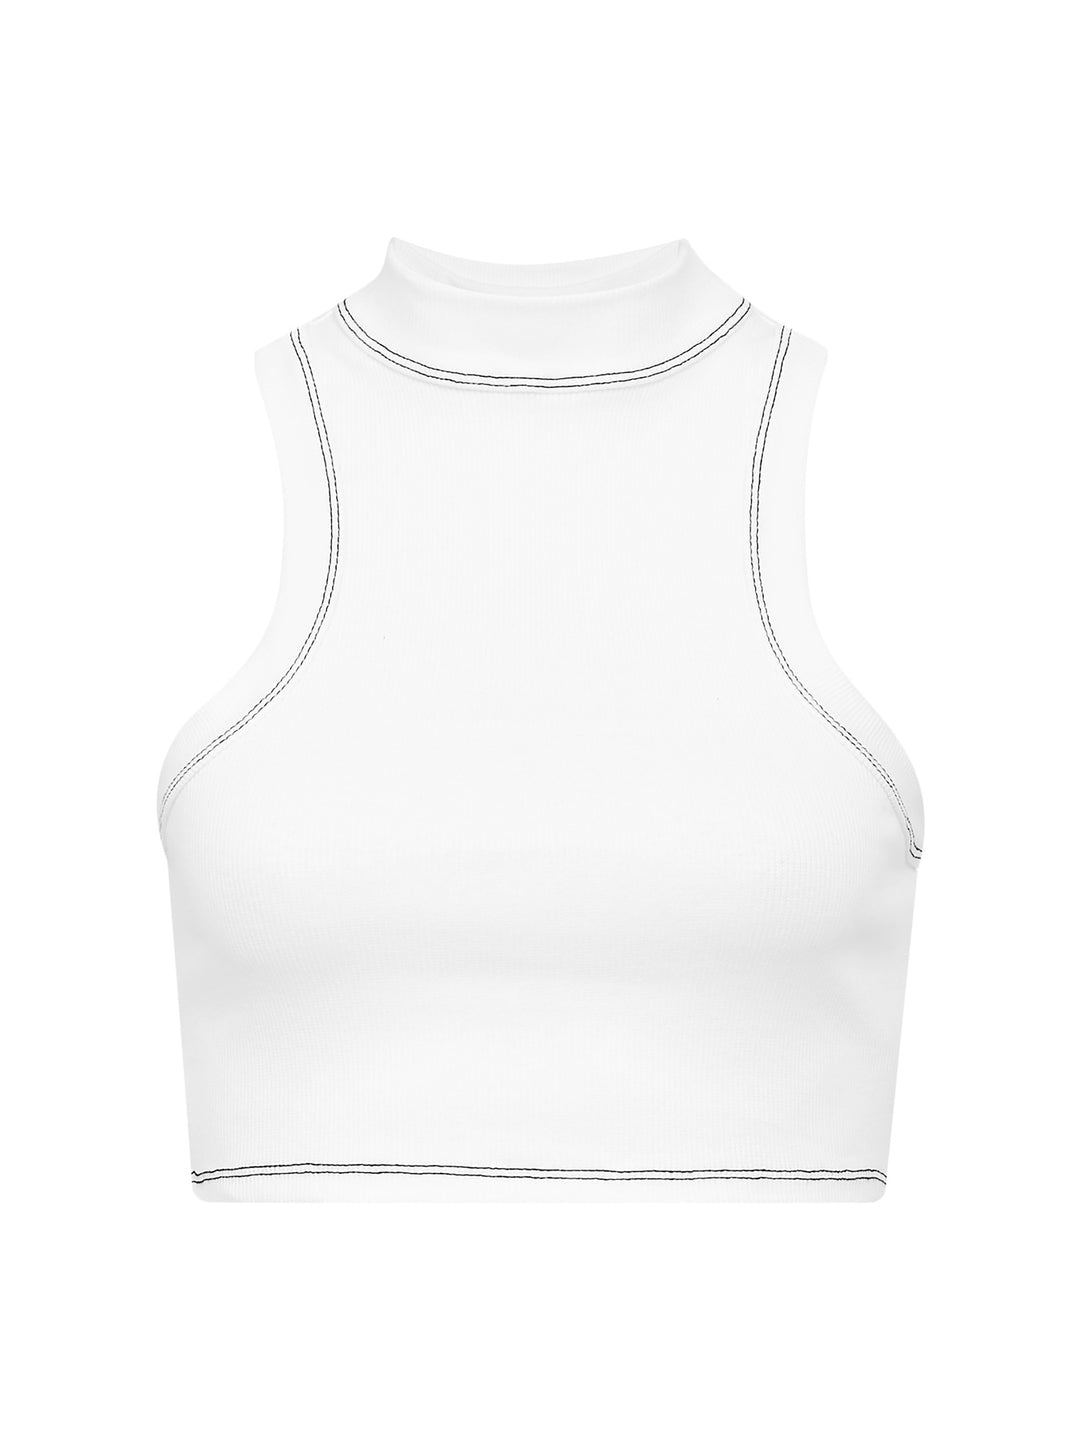 CONTRAST - Ribbed Cropped Top • White